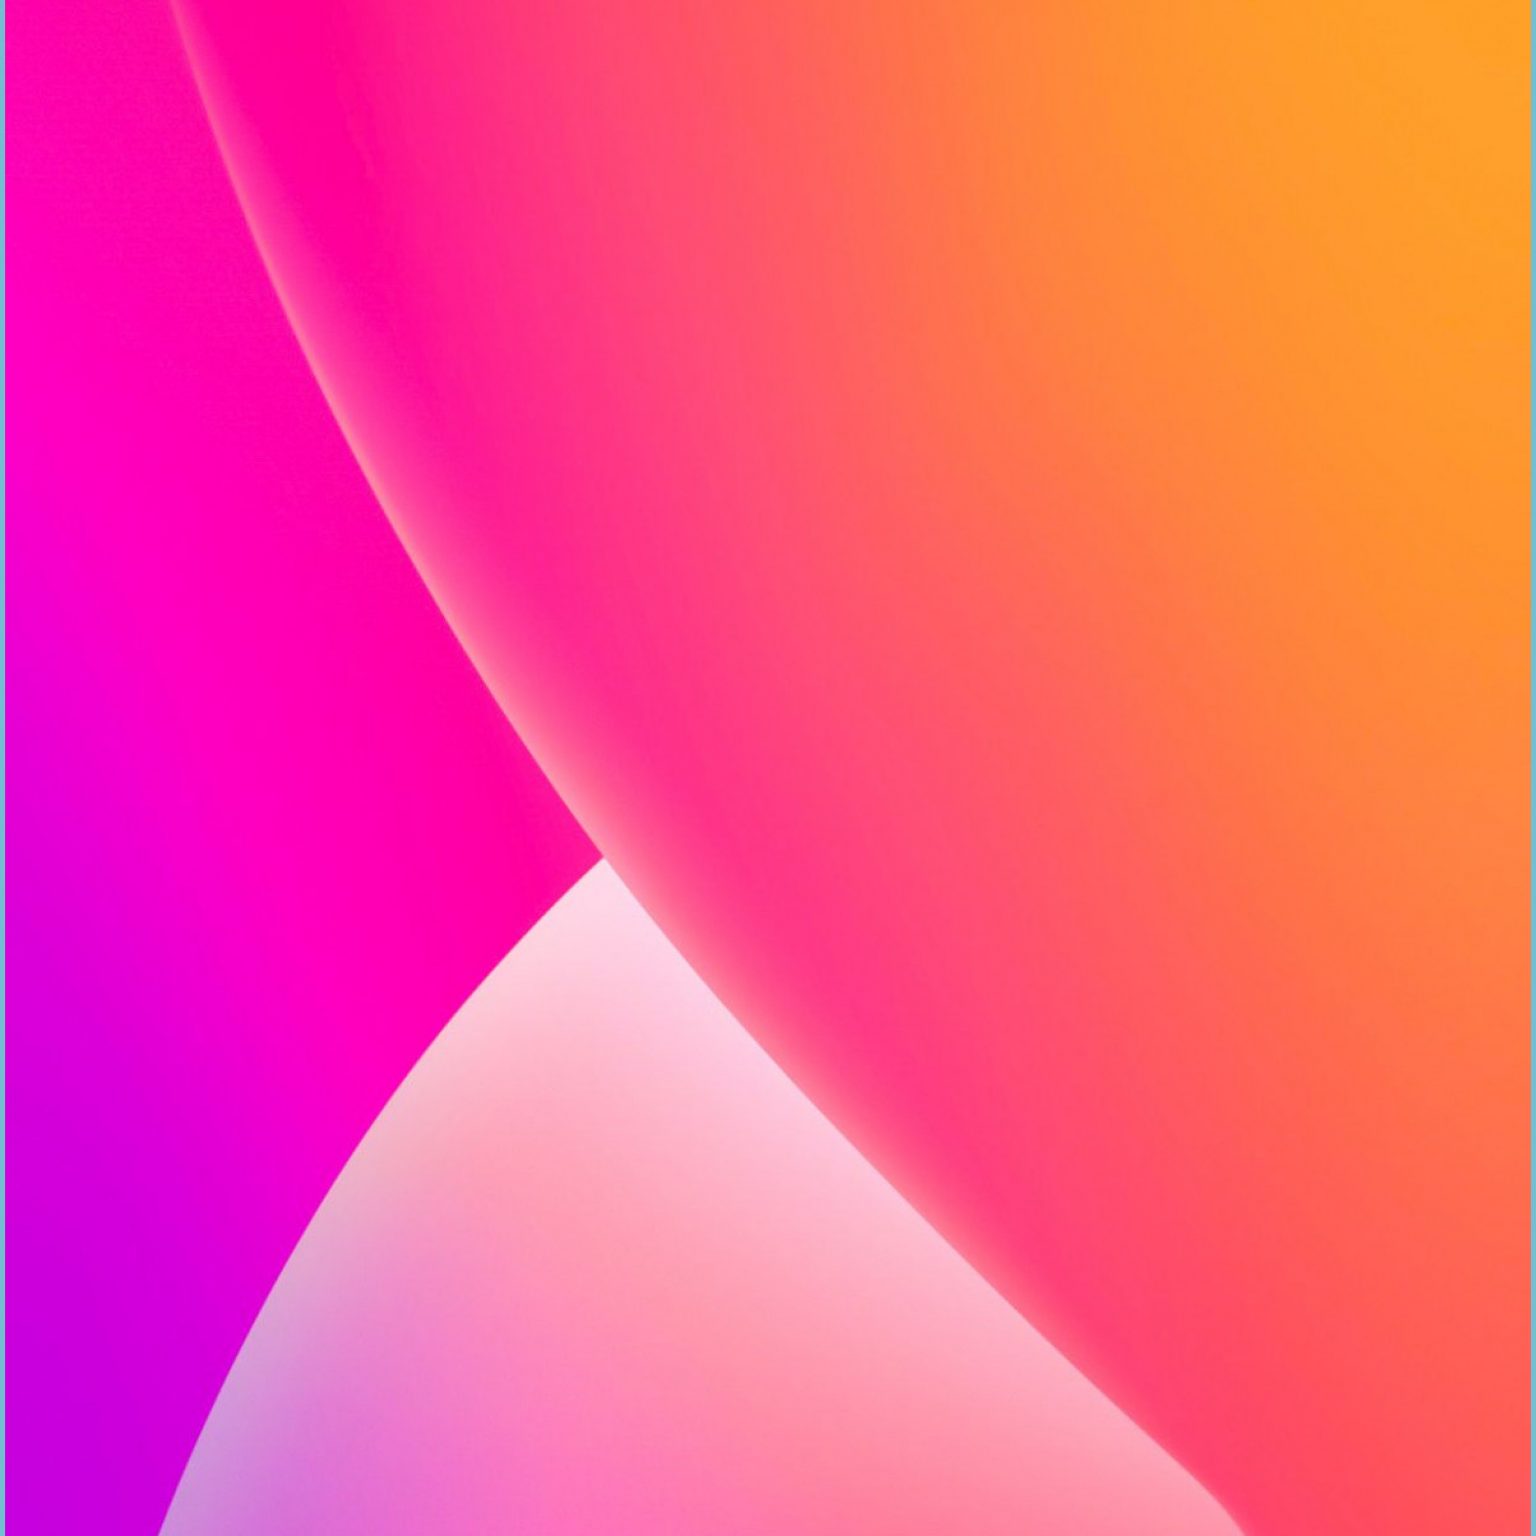 IOS 11 Wallpaper In 11 Colourful Wallpaper iPhone, iPhone Wallpaper Ios 14